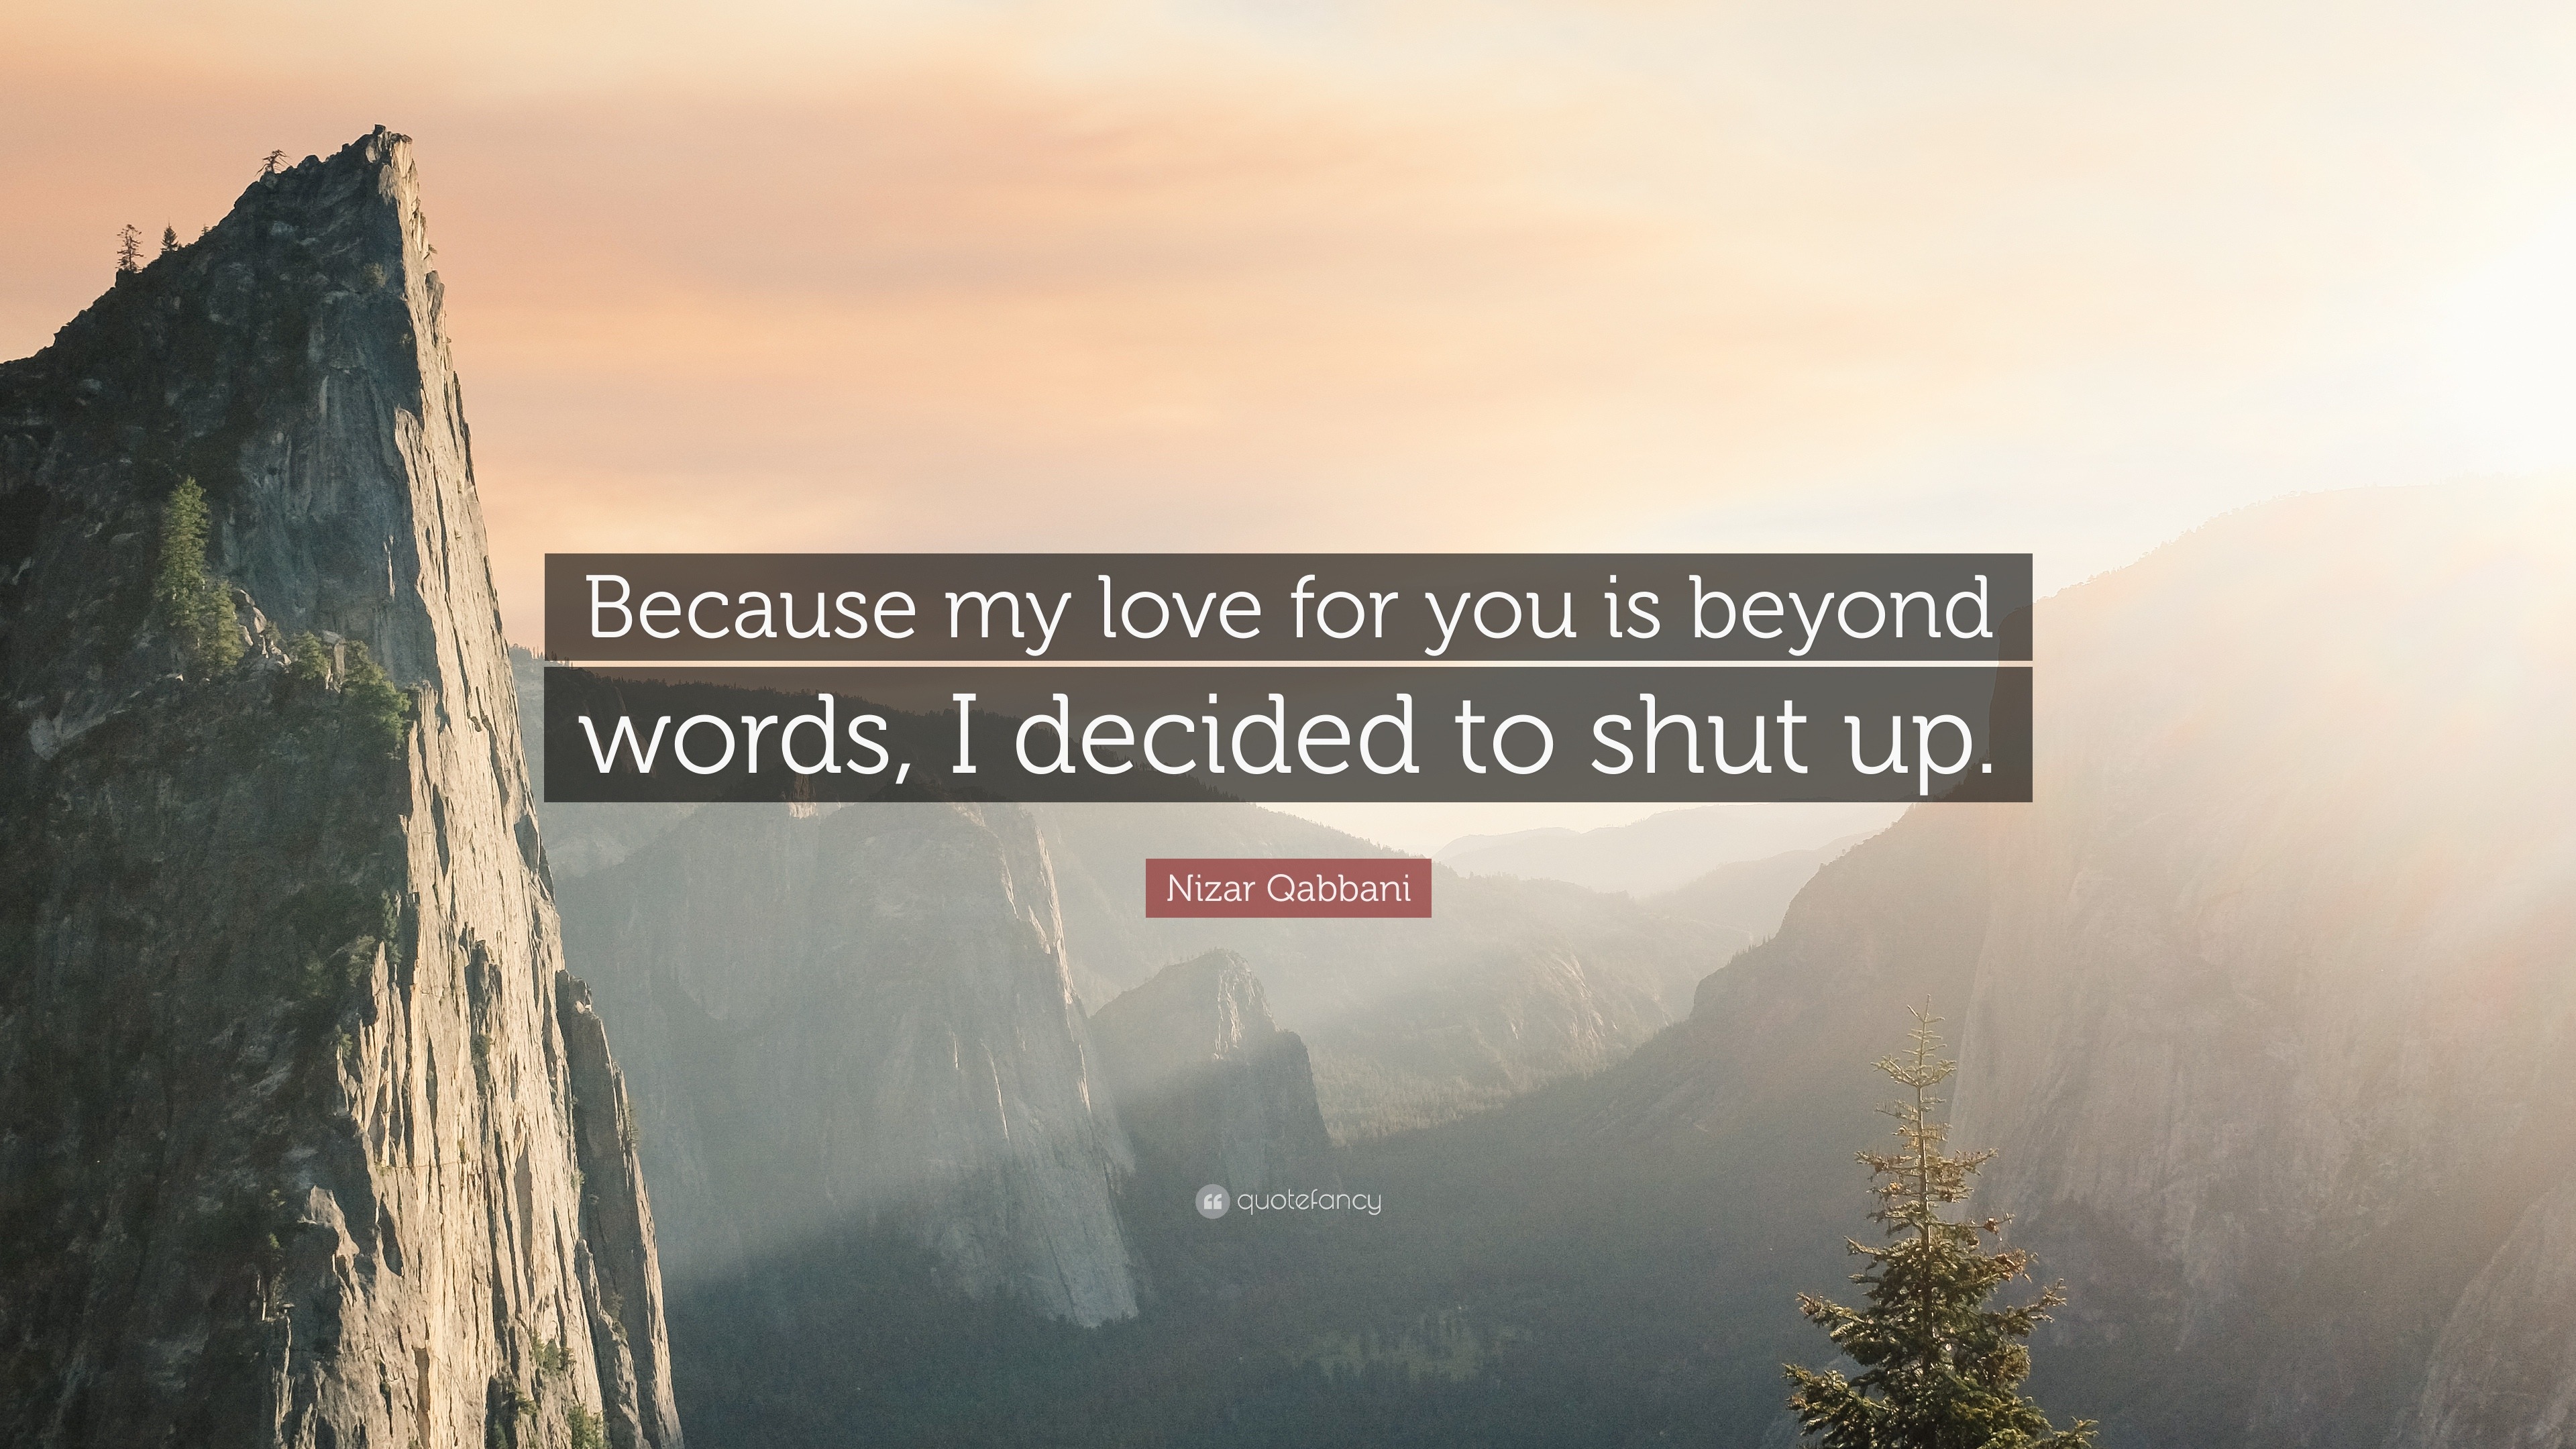 Nizar Qabbani Quote “Because my love for you is beyond words I decided